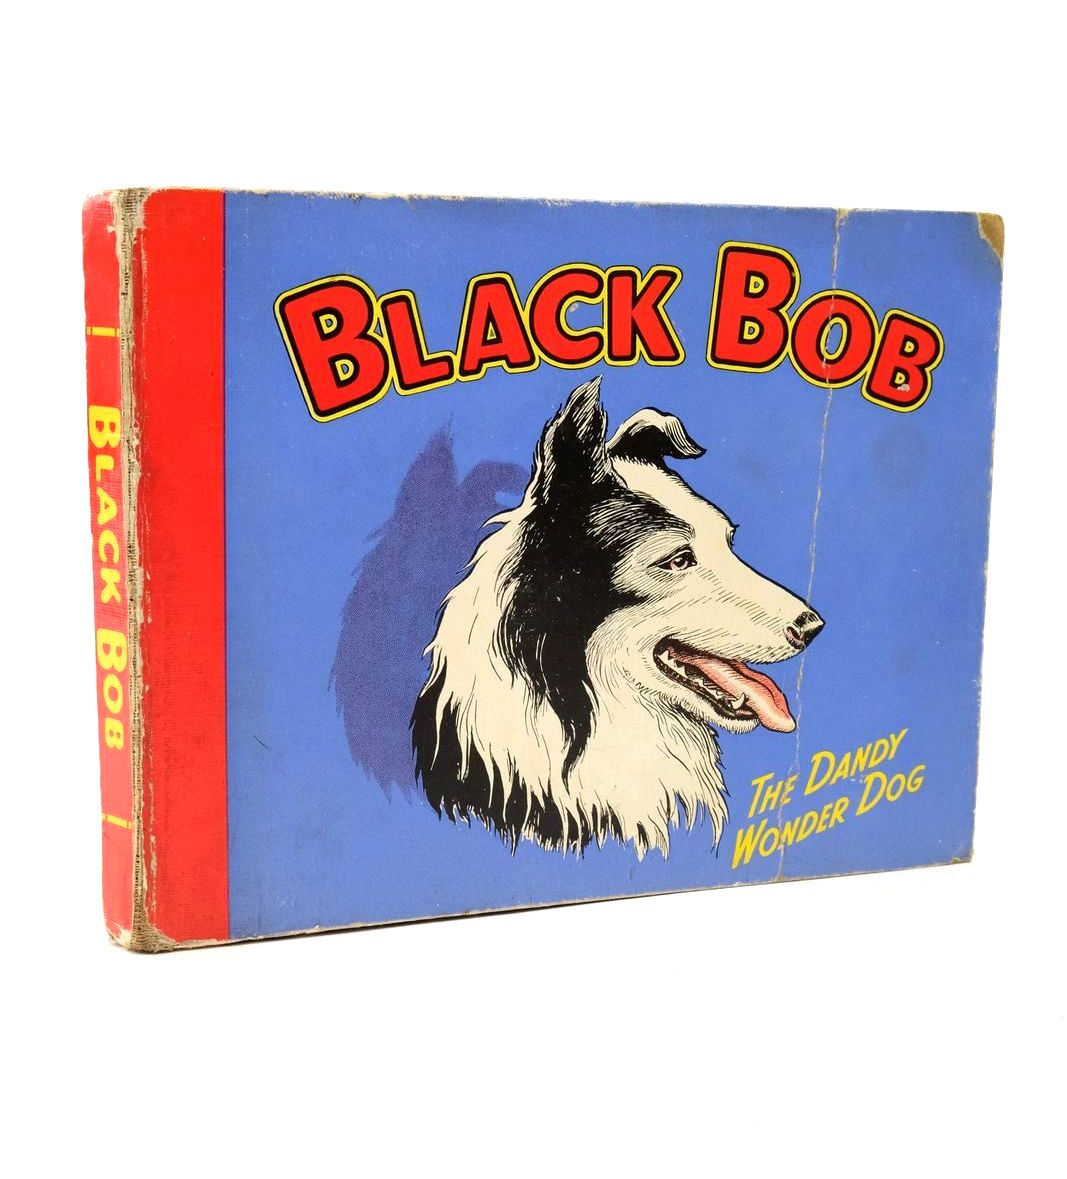 Photo of BLACK BOB THE DANDY WONDER DOG 1951 illustrated by Prout, Jack published by D.C. Thomson & Co Ltd. (STOCK CODE: 1322726)  for sale by Stella & Rose's Books